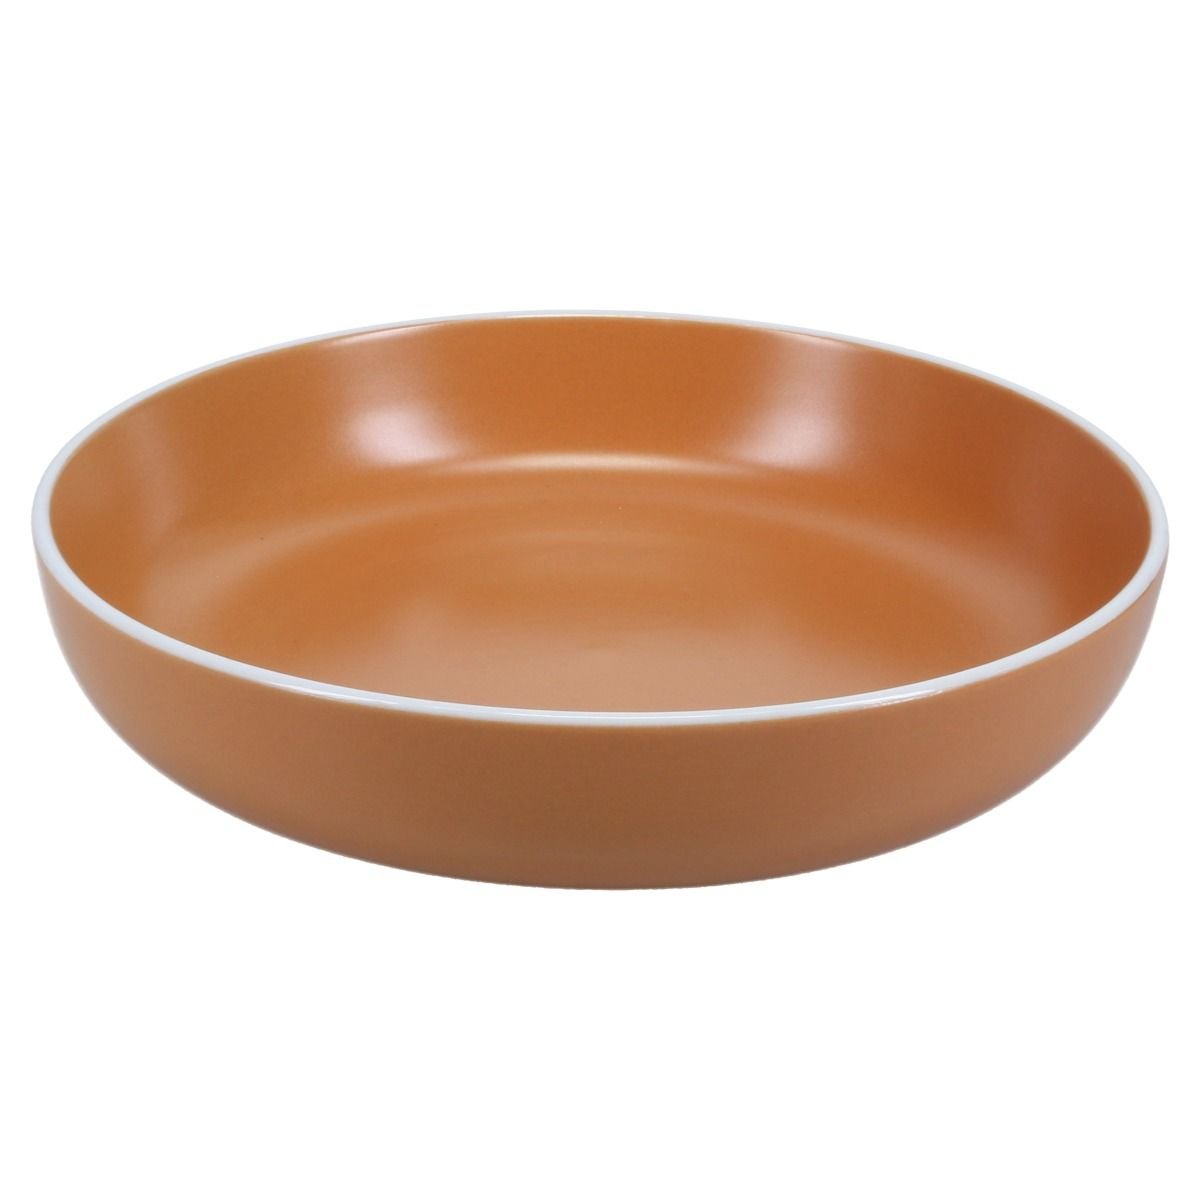 Stoneware Microwave Cooker Ceramic Bowl With Special Domed Lid 12 Ounce  Capacity Brown 